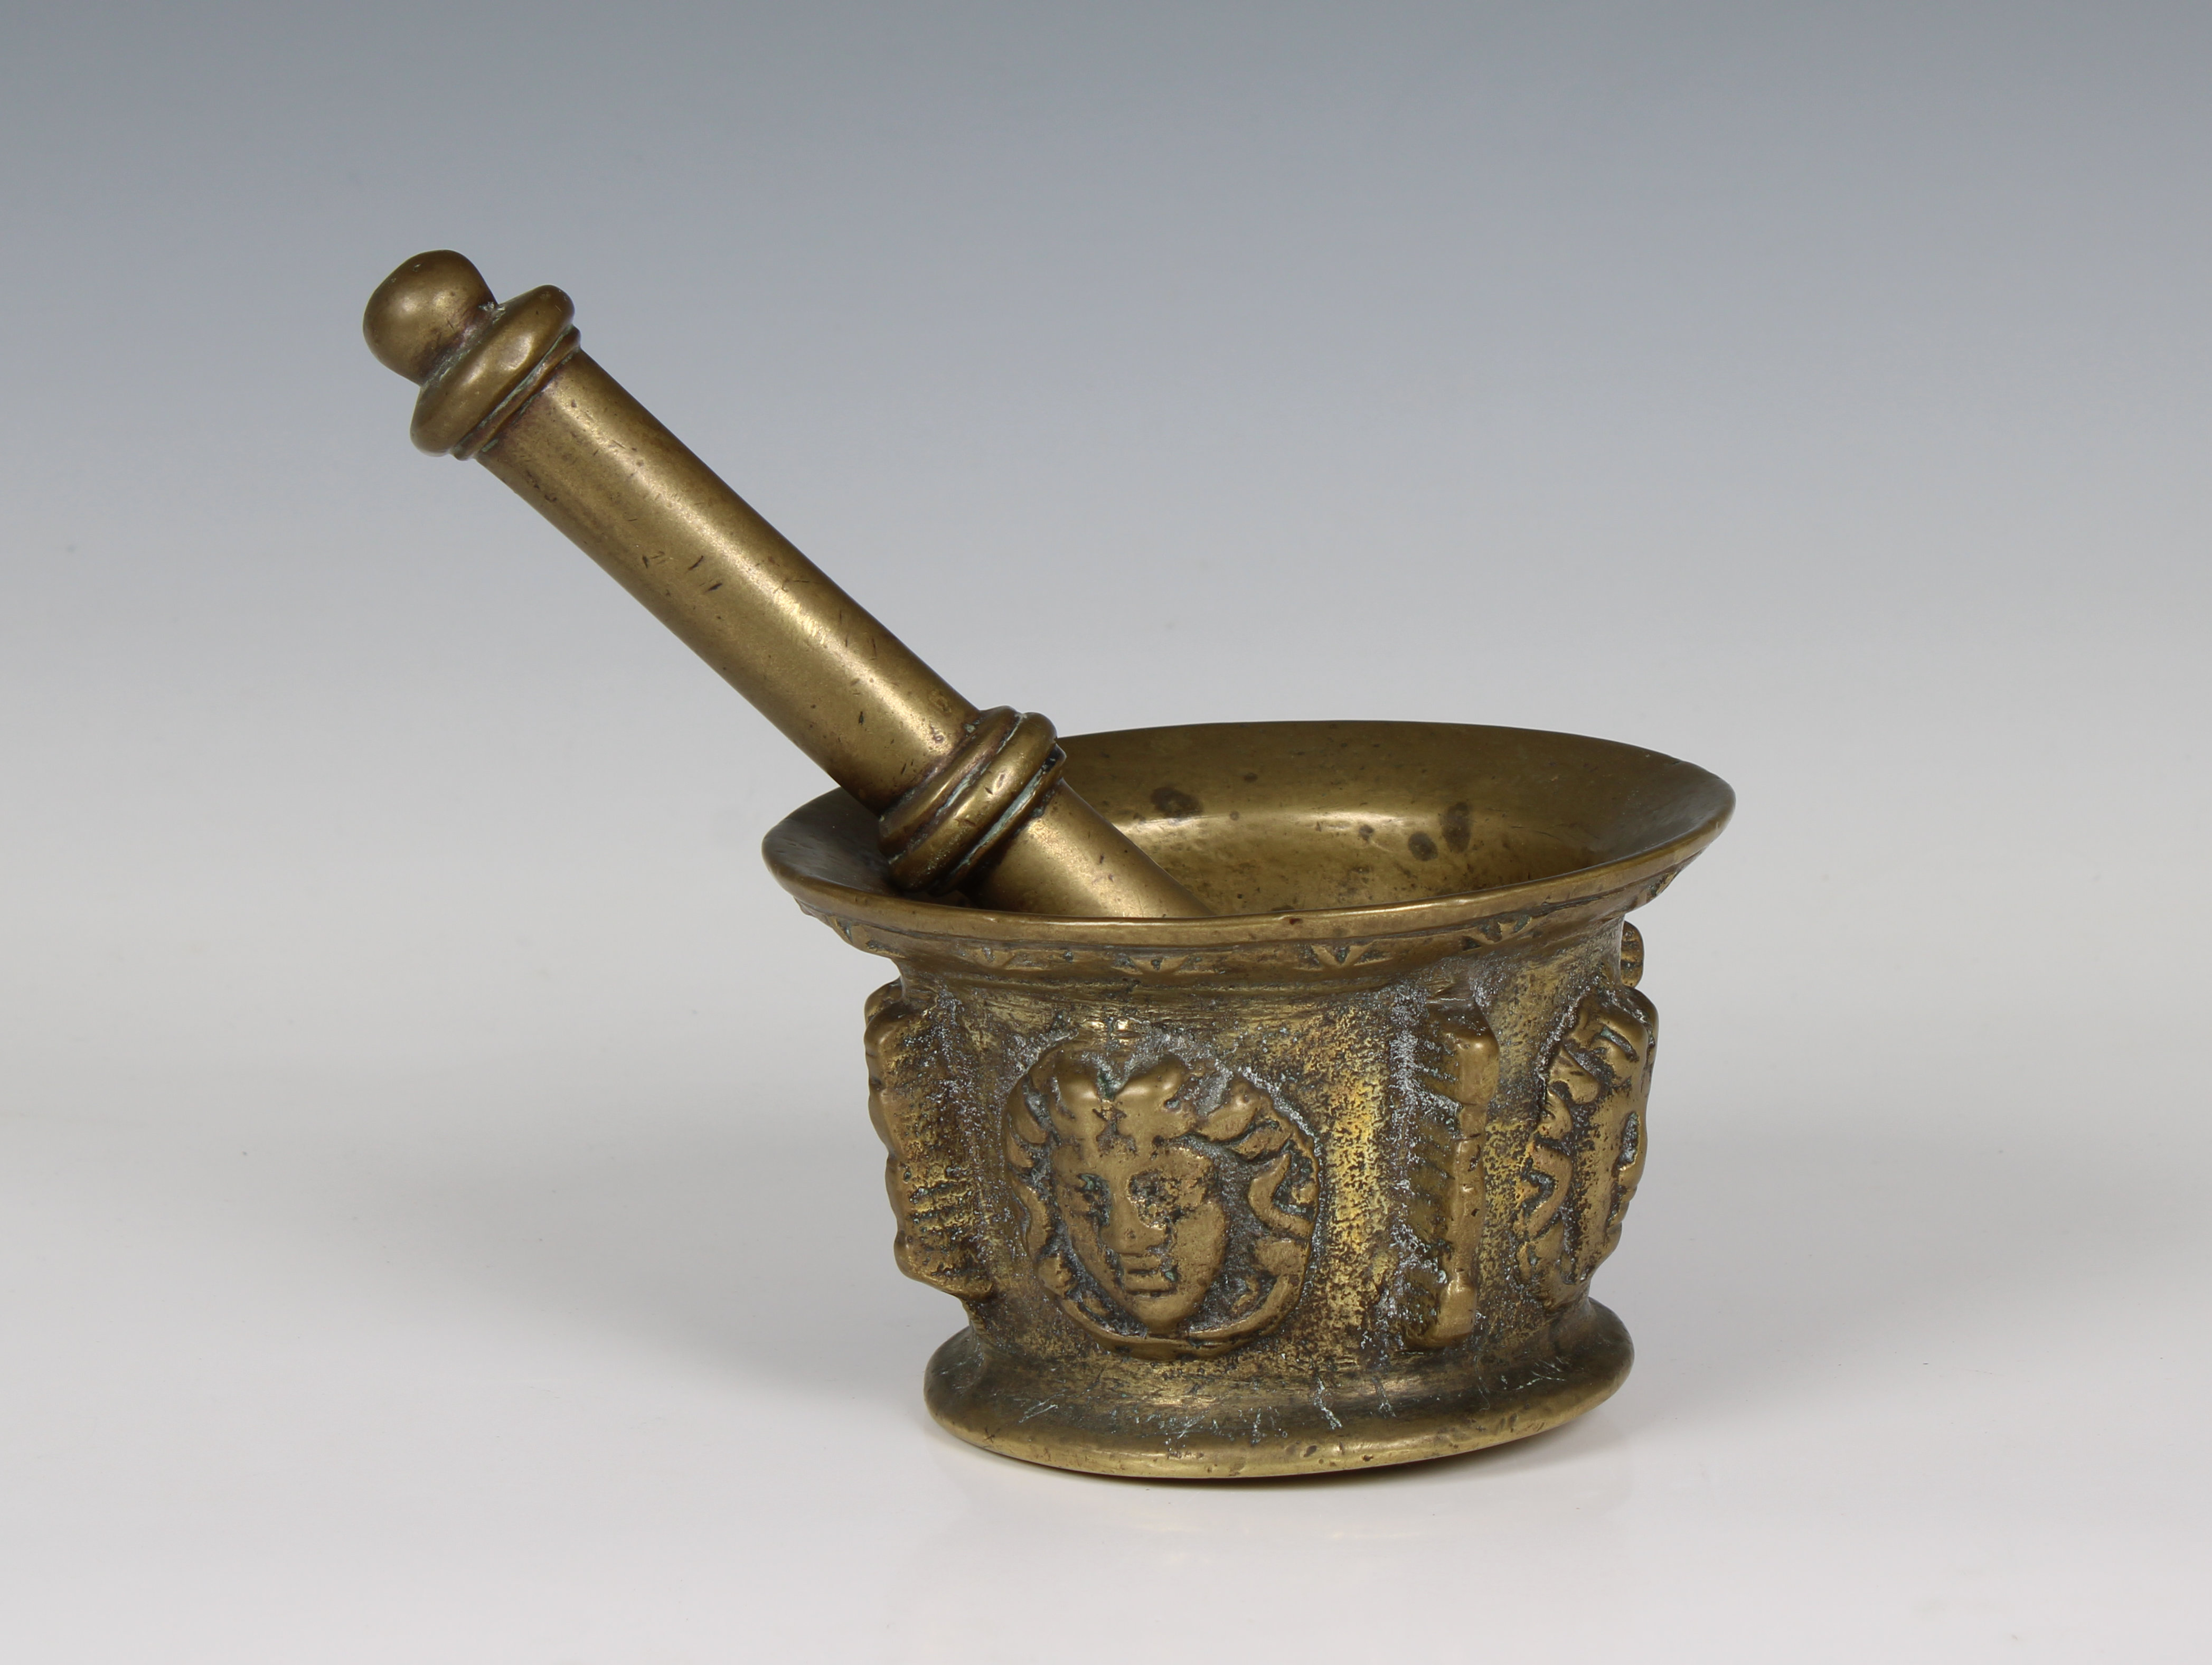 A 17th century figural brass apothecary pestle and mortar - Image 2 of 3